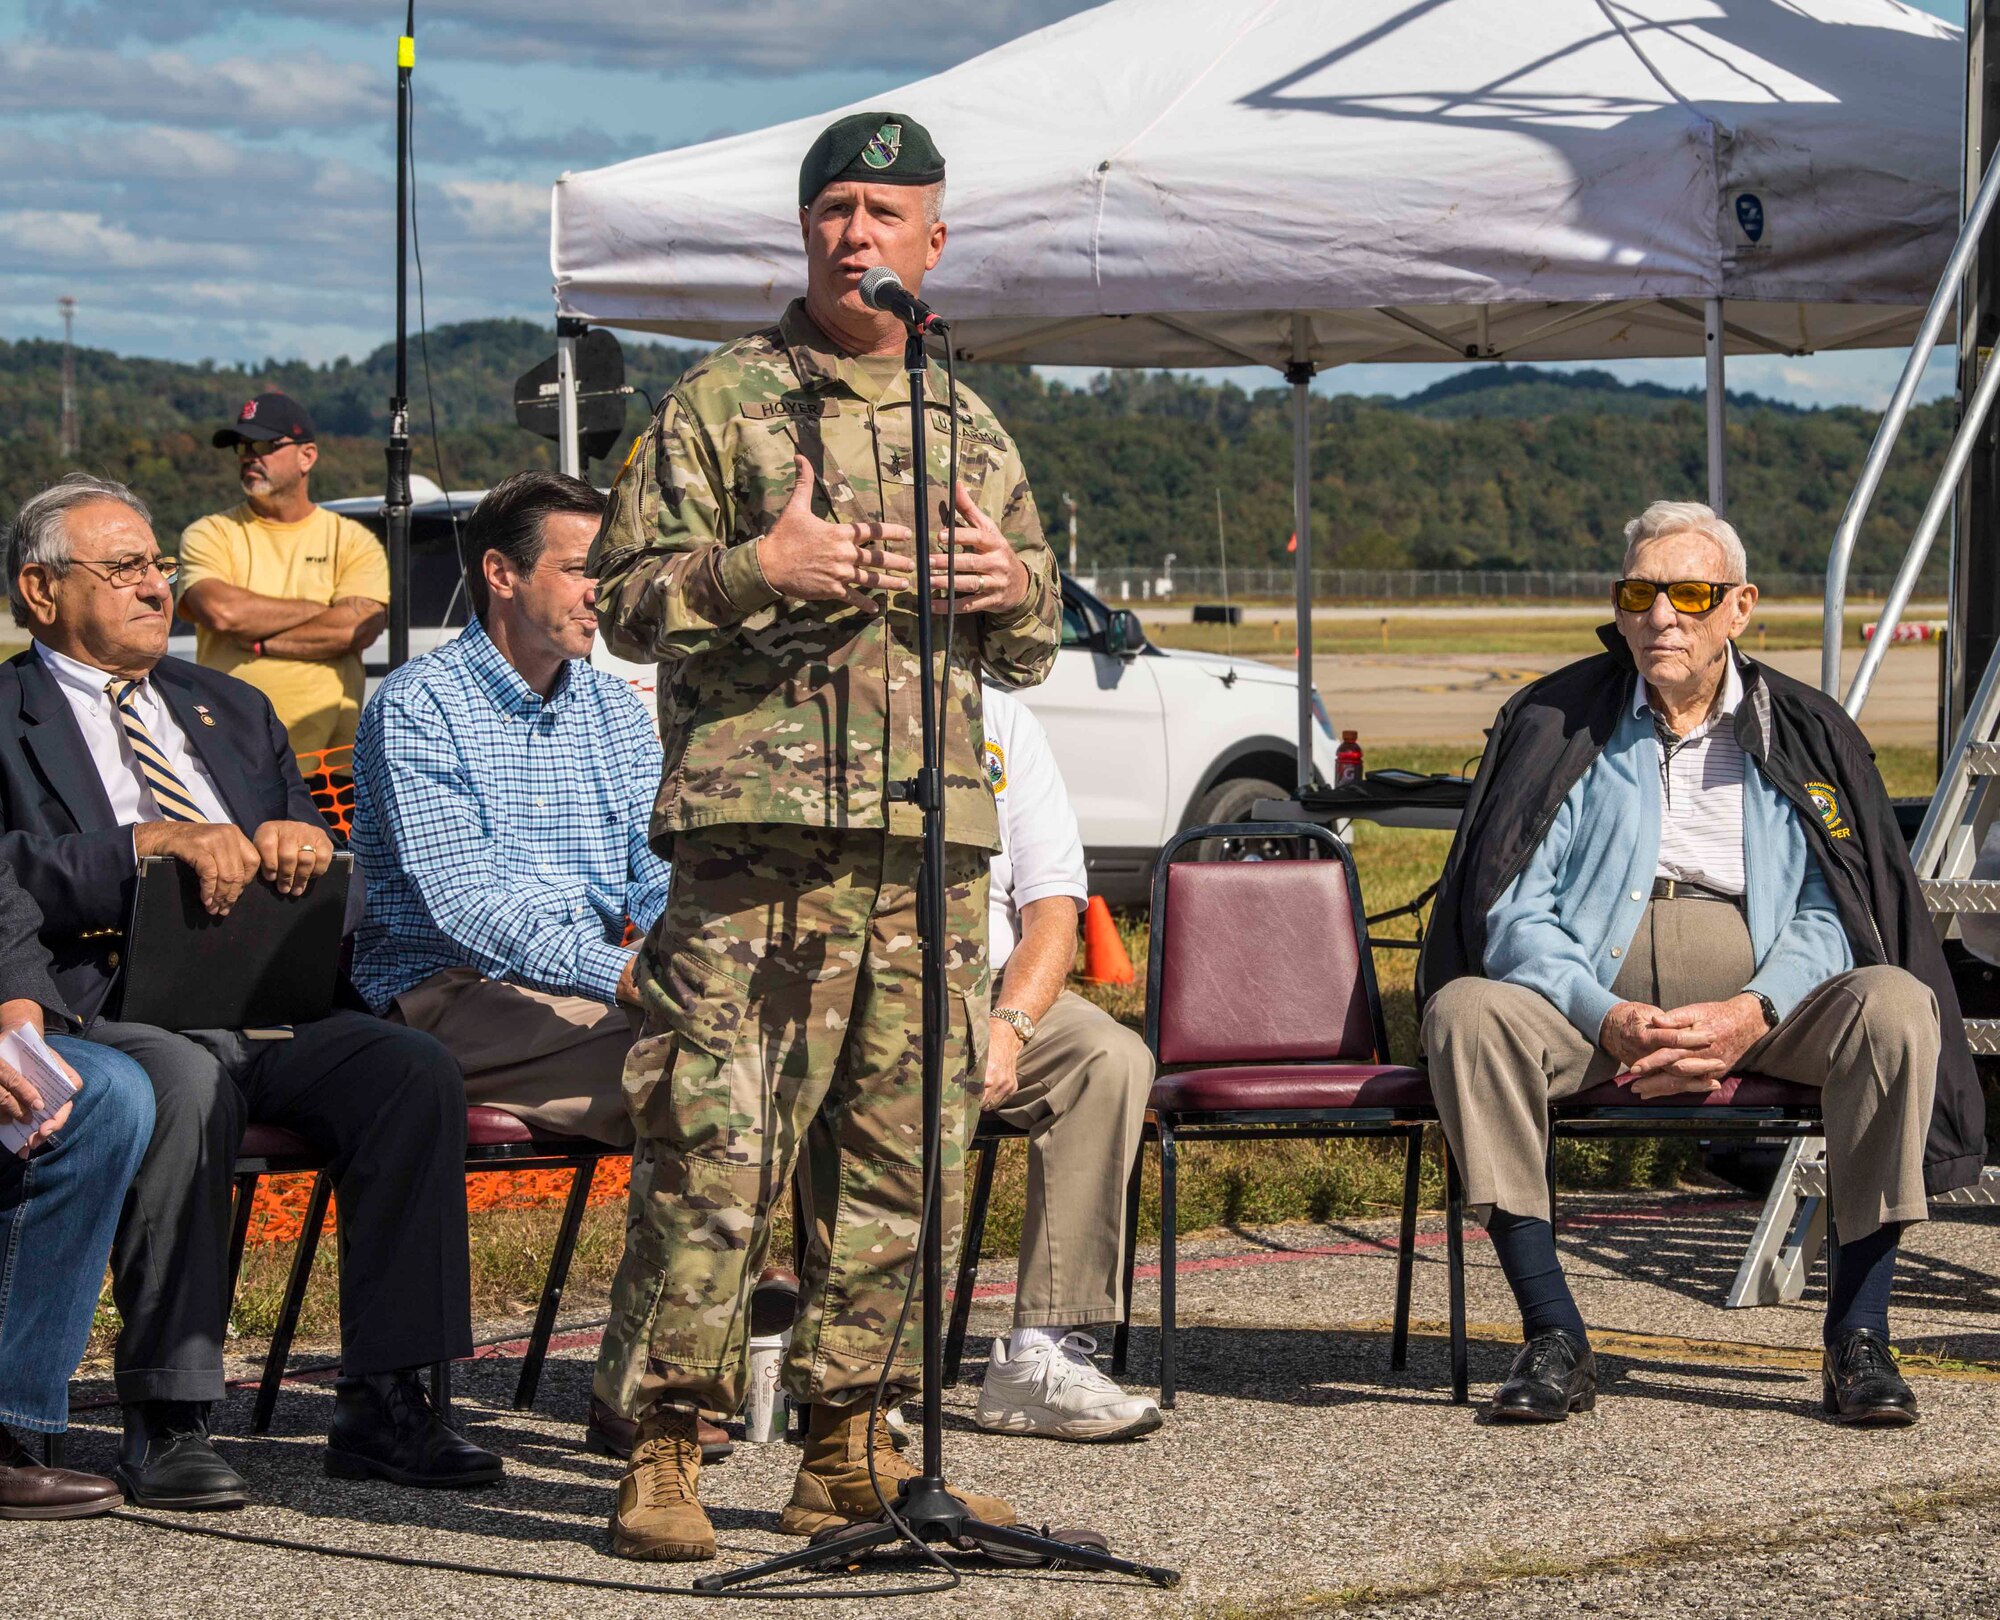 Maj. Gen. James A. Hoyer, the Adjutant General of the West Virginia National Guard, gives opening remarks during the Yeager Airport and West Virginia Air National Guard 70th Anniversary Air Show, Sept. 30, 2017, at McLaughlin Air National Guard Base/Yeager Airport, Charleston, West Virginia. The West Virginia Air National Guard was founded Nov. 3, 1947, at what is now Yeager Airport. The 70th Anniversary Air Show commemorates the rich history of the WVANG. (U.S. Air National Guard photo by Tech. Sgt. De-Juan Haley)